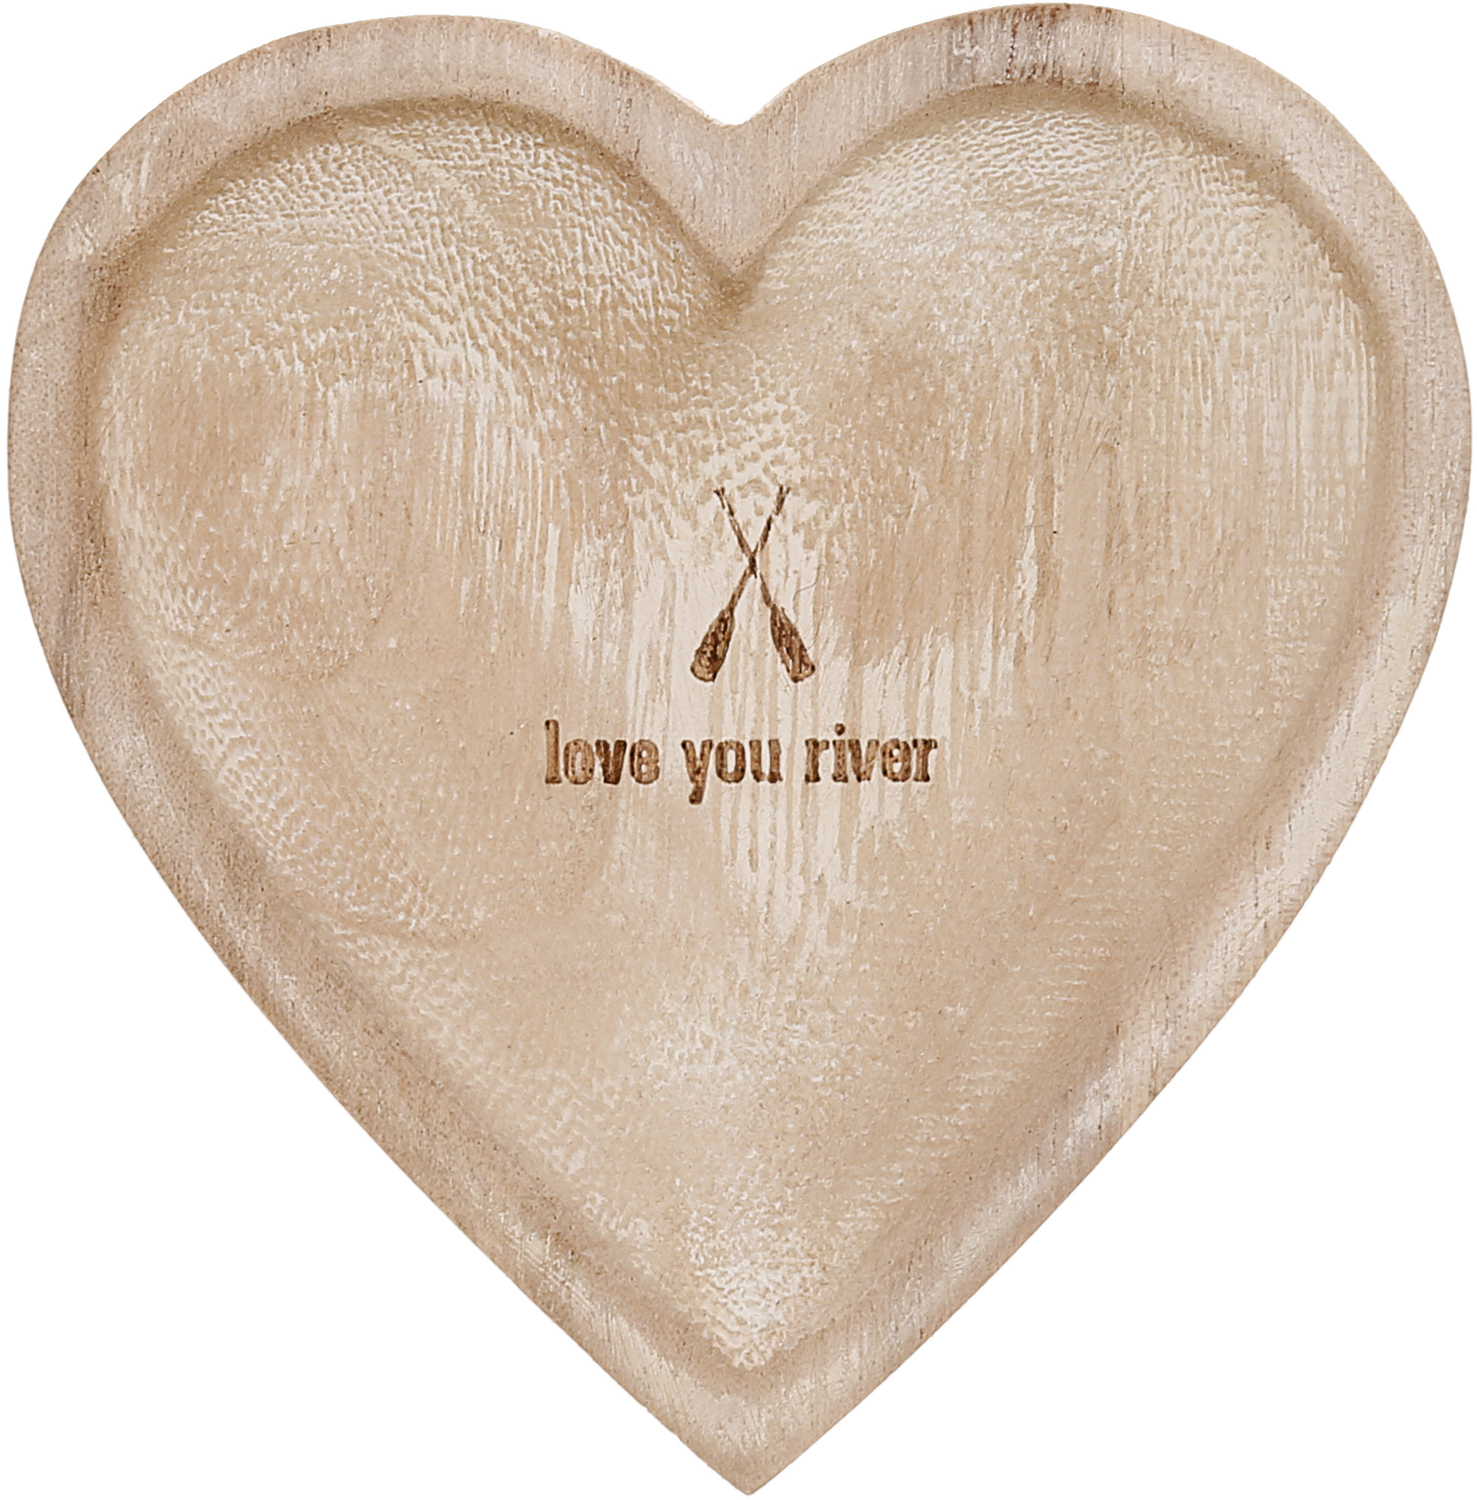 Love You River by We People - Love You River - 4" Wood Keepsake Dish